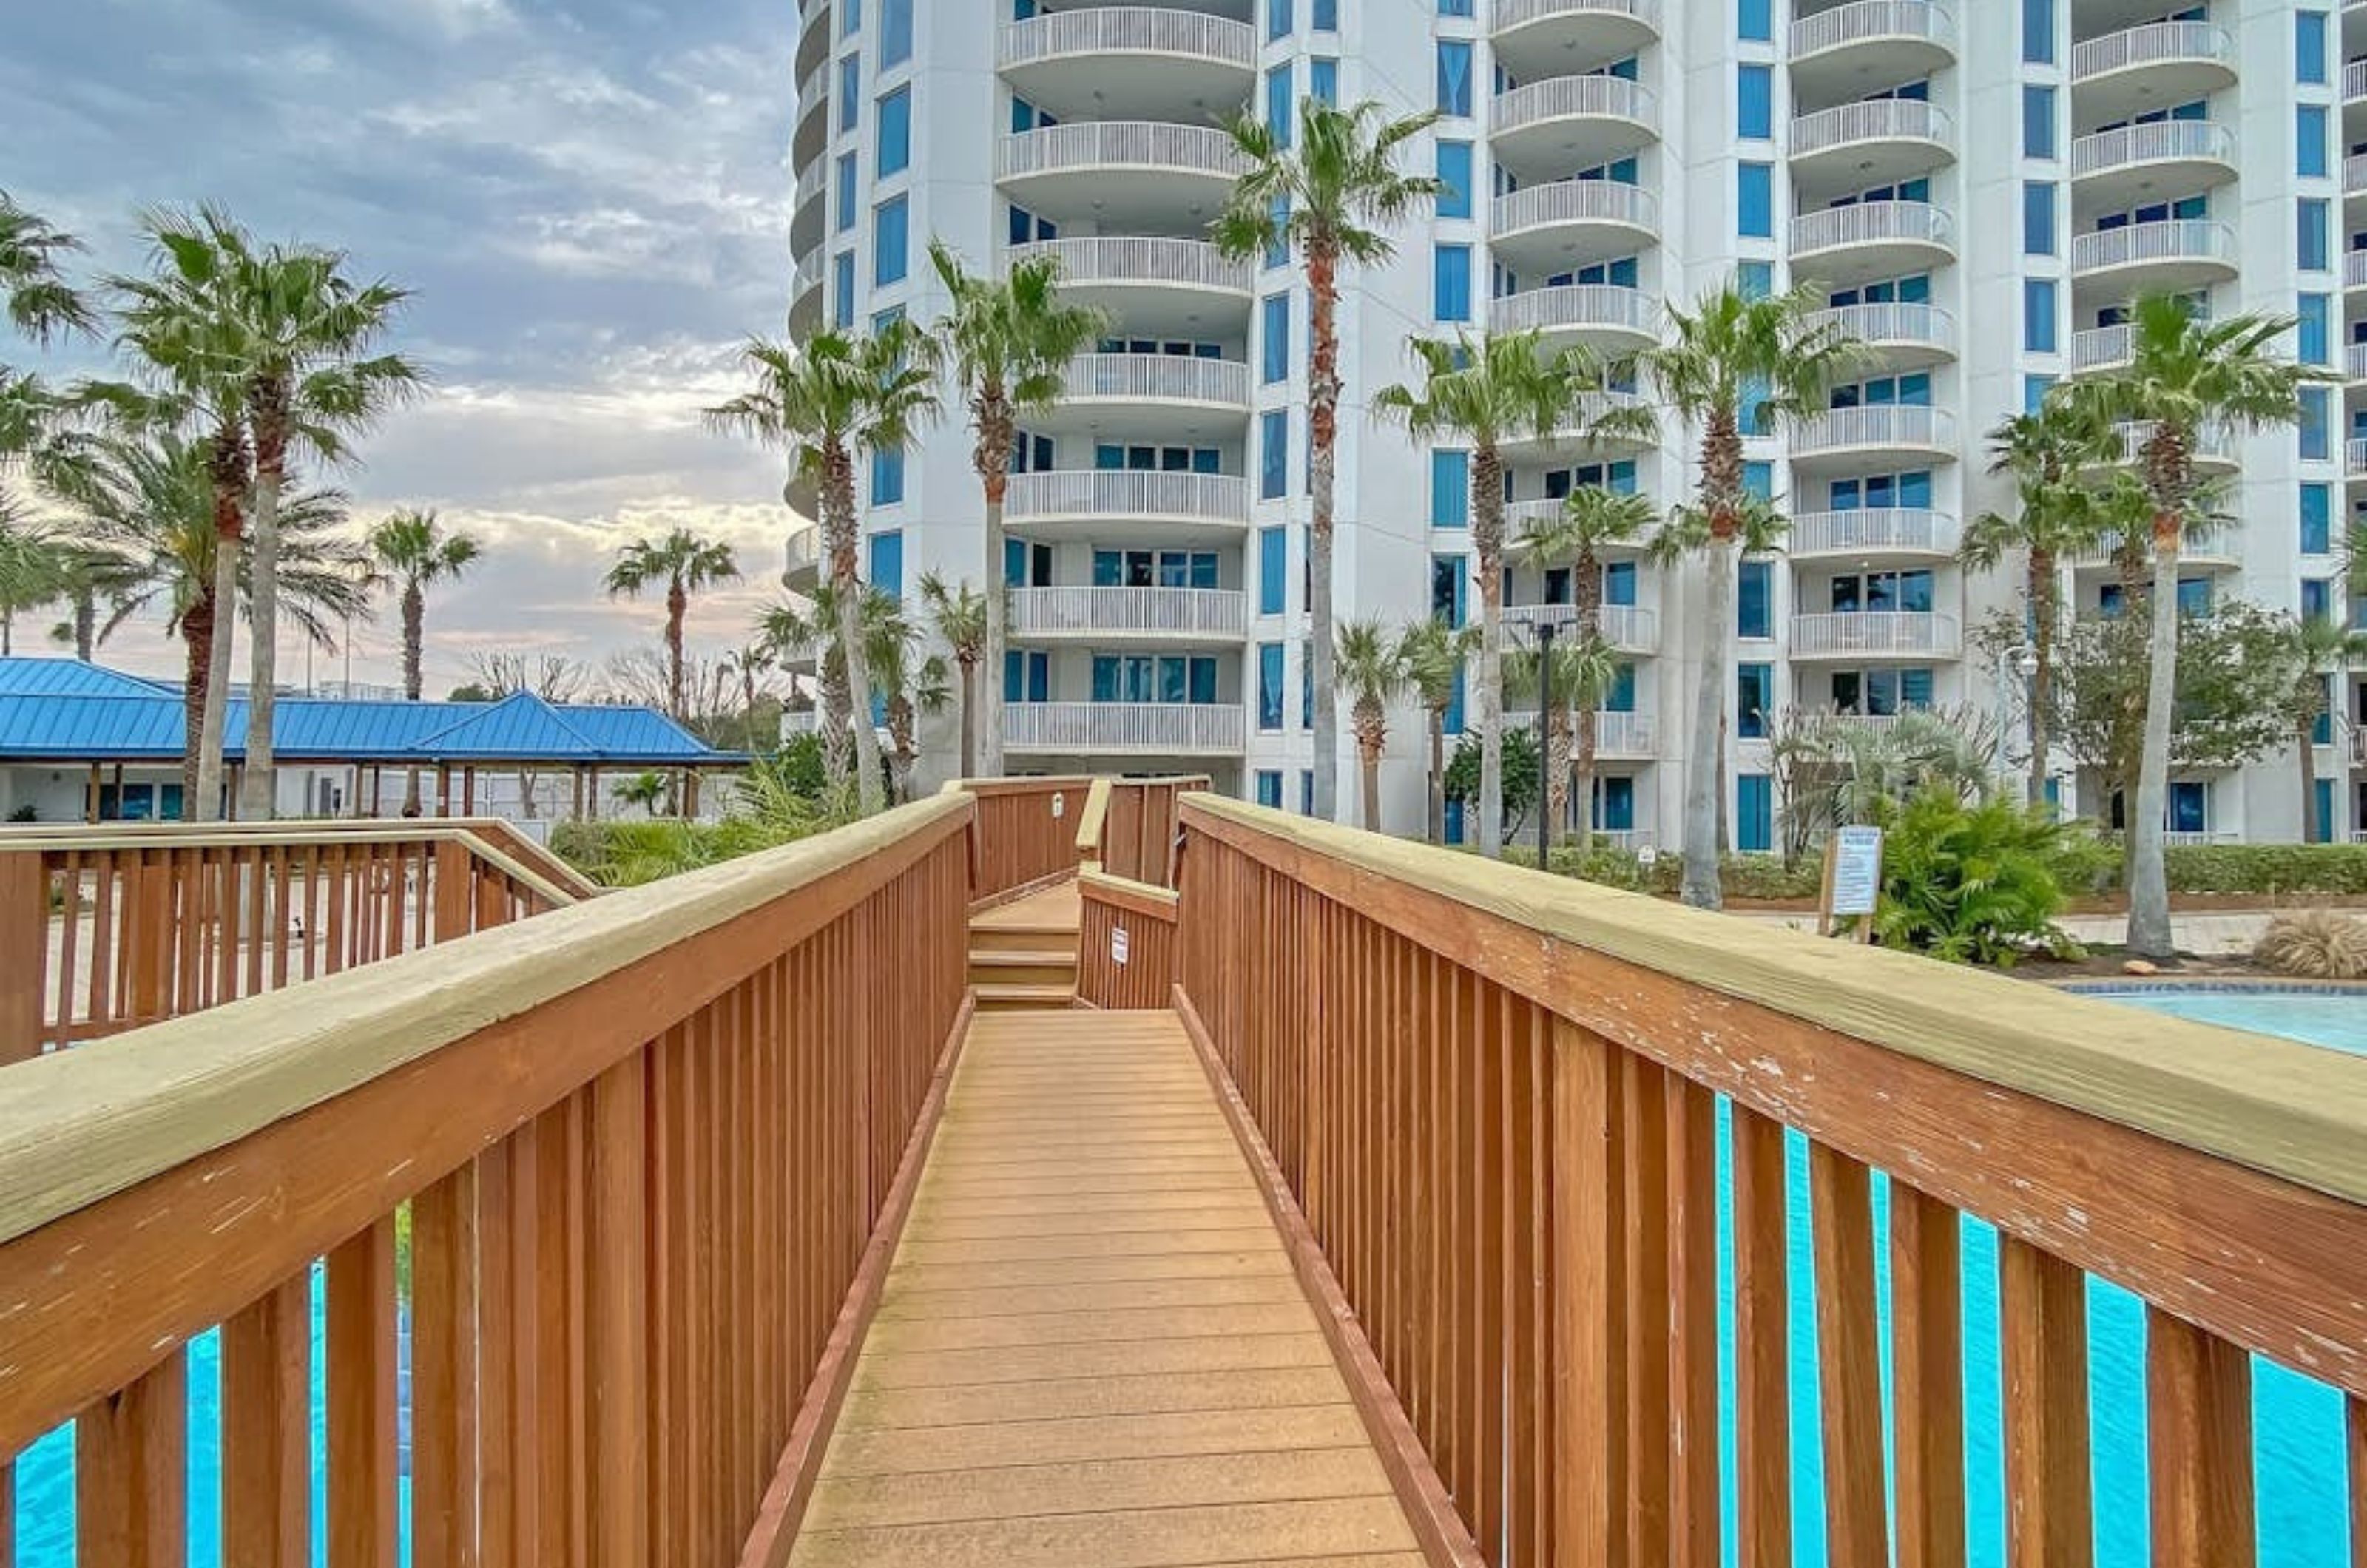 A view on the wooden bridge crossing over the outdoor swimming pool at the Palms of Destin